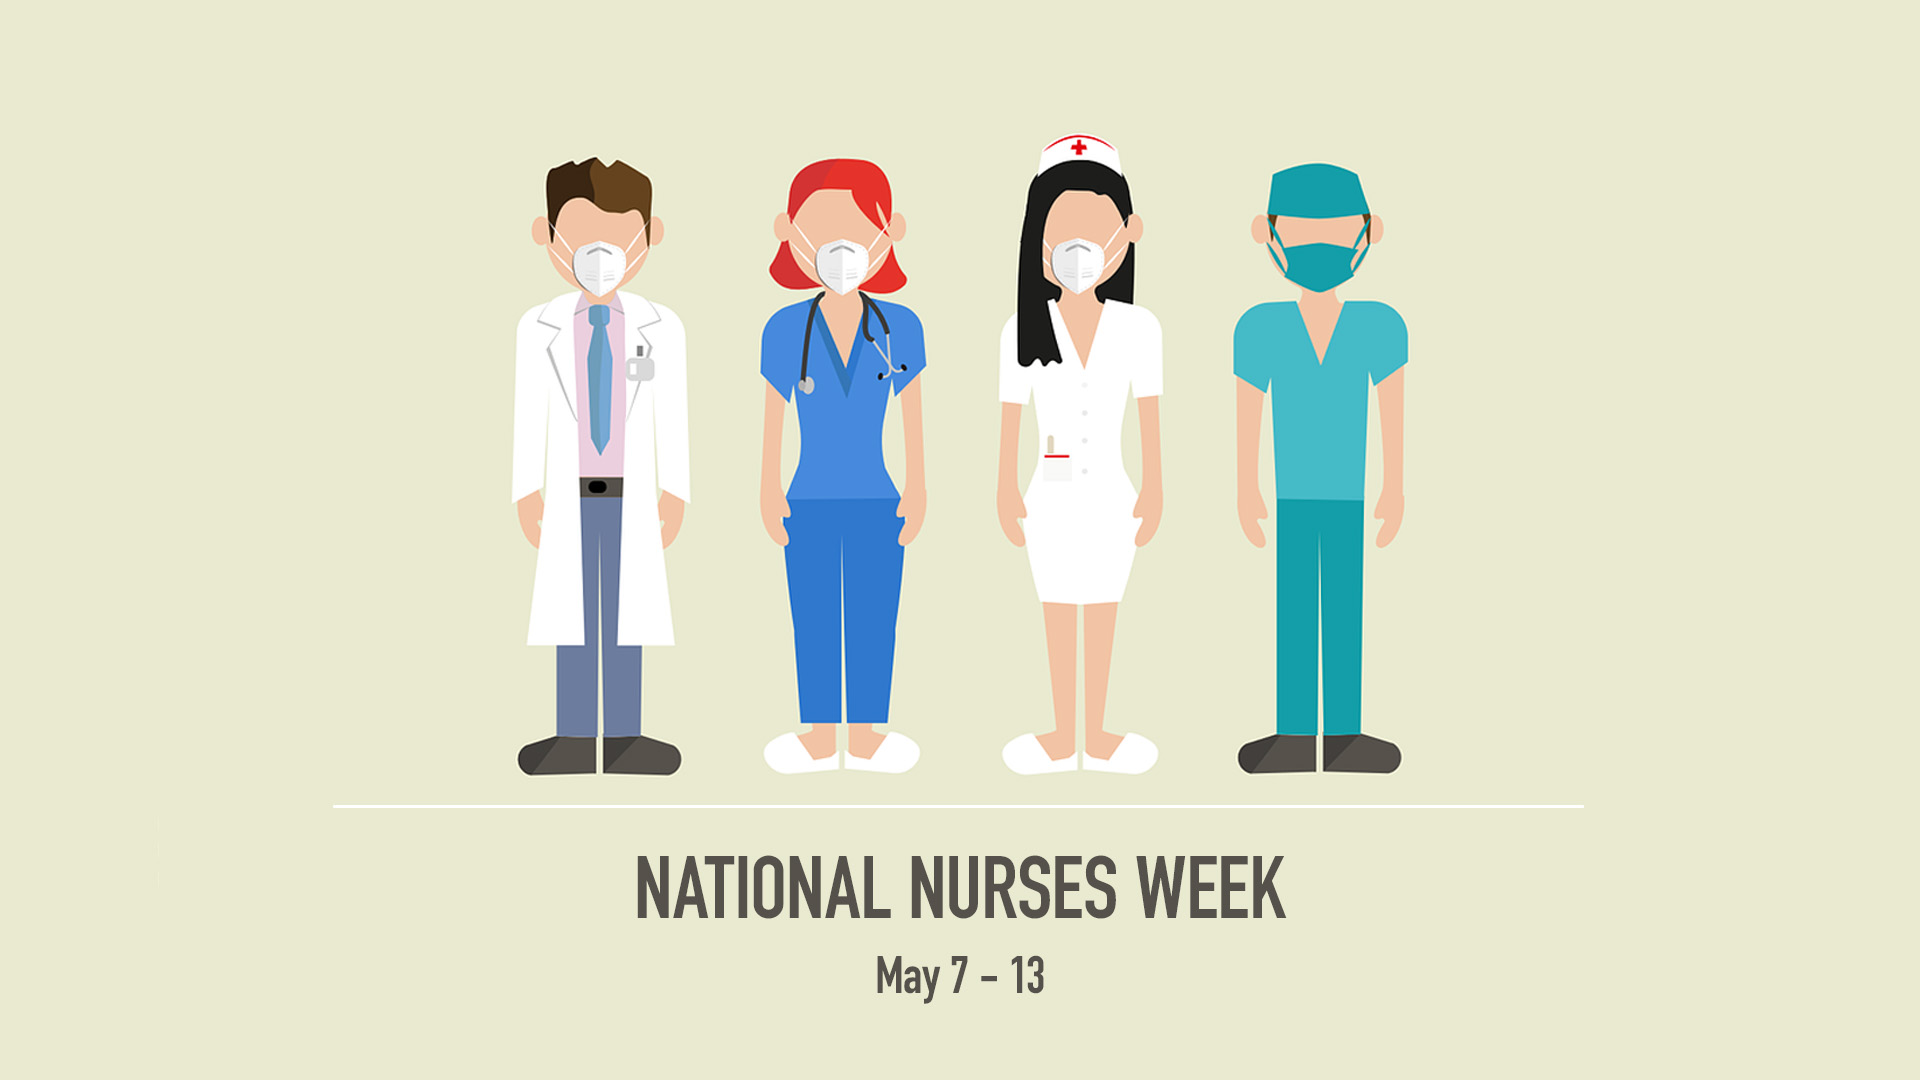 A tan background with an illustrated image of 4 different healthcare works in their uniform standing in a line. National Nurses Week May 7 - 13 is written below it in brown font across the bottom of the image.